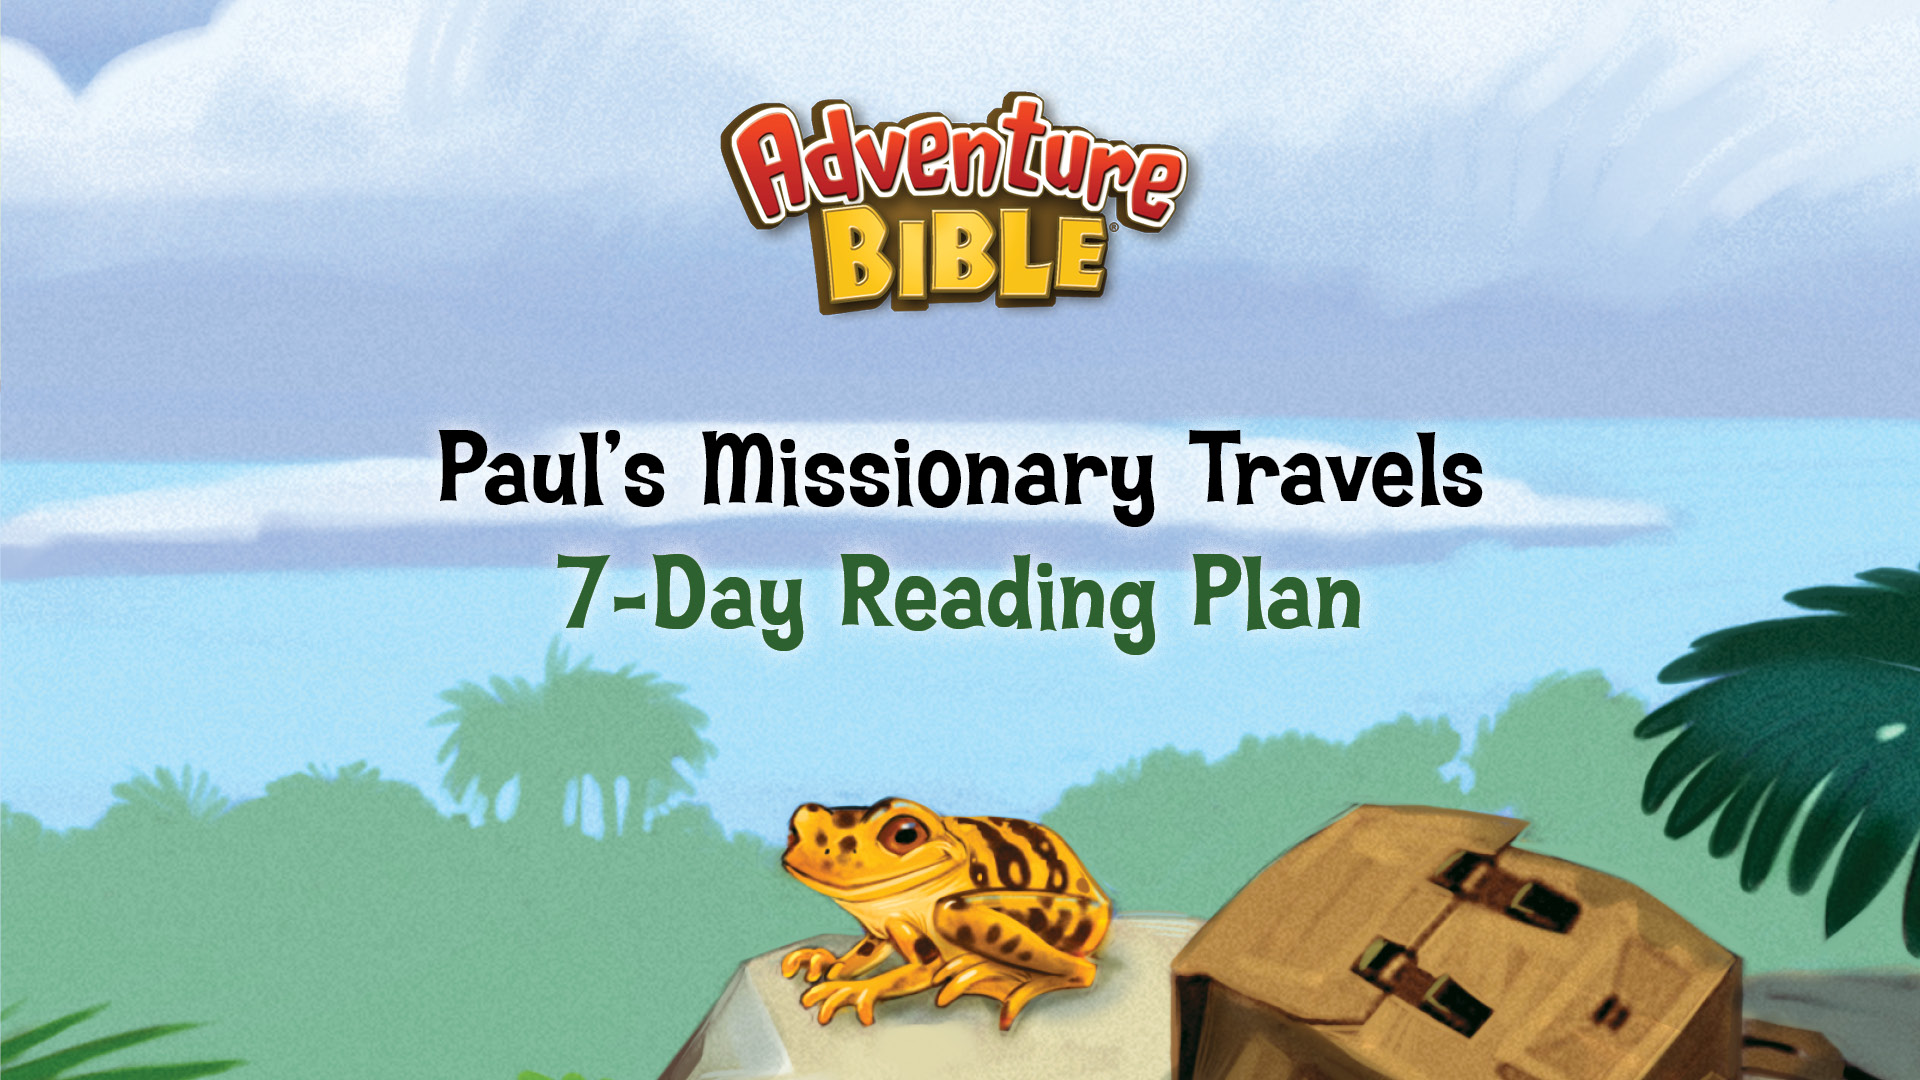 Adventure Bible Paul's Missionary Travels 7 Day Reading Plan